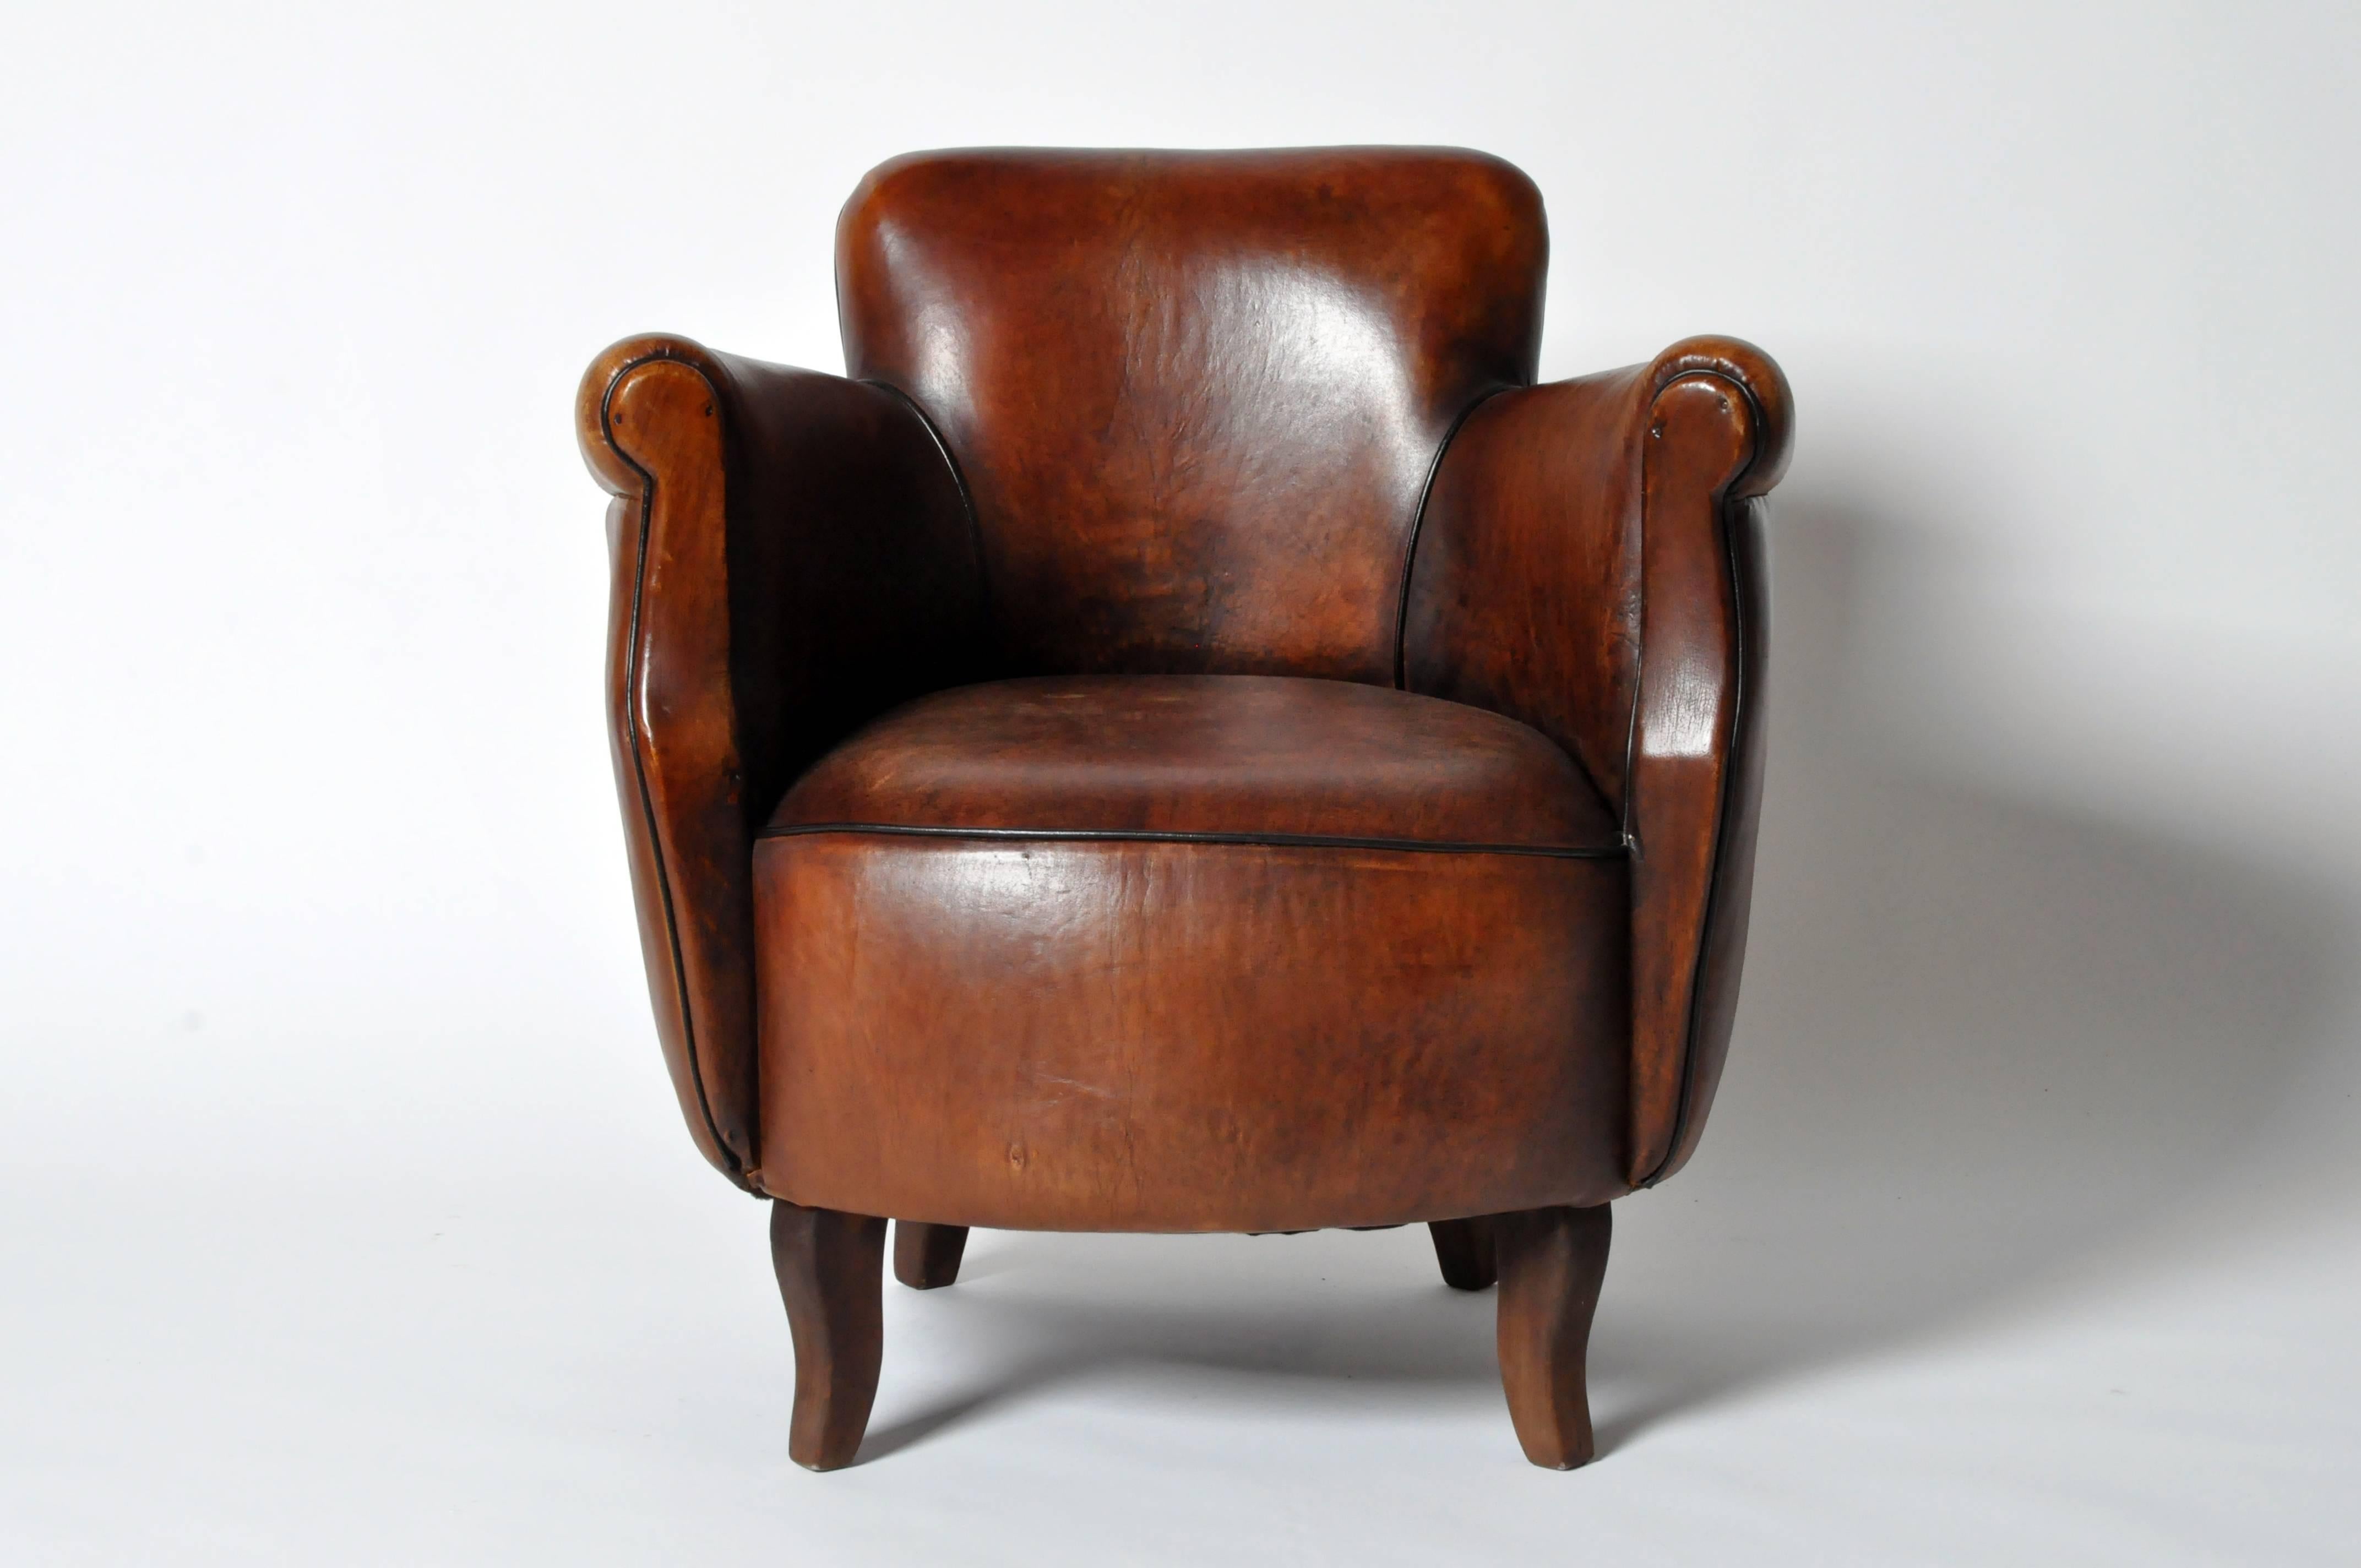 These compact leather chairs feature rich, espresso brown upholstery, thick padded seats and slim, roll panel arms.